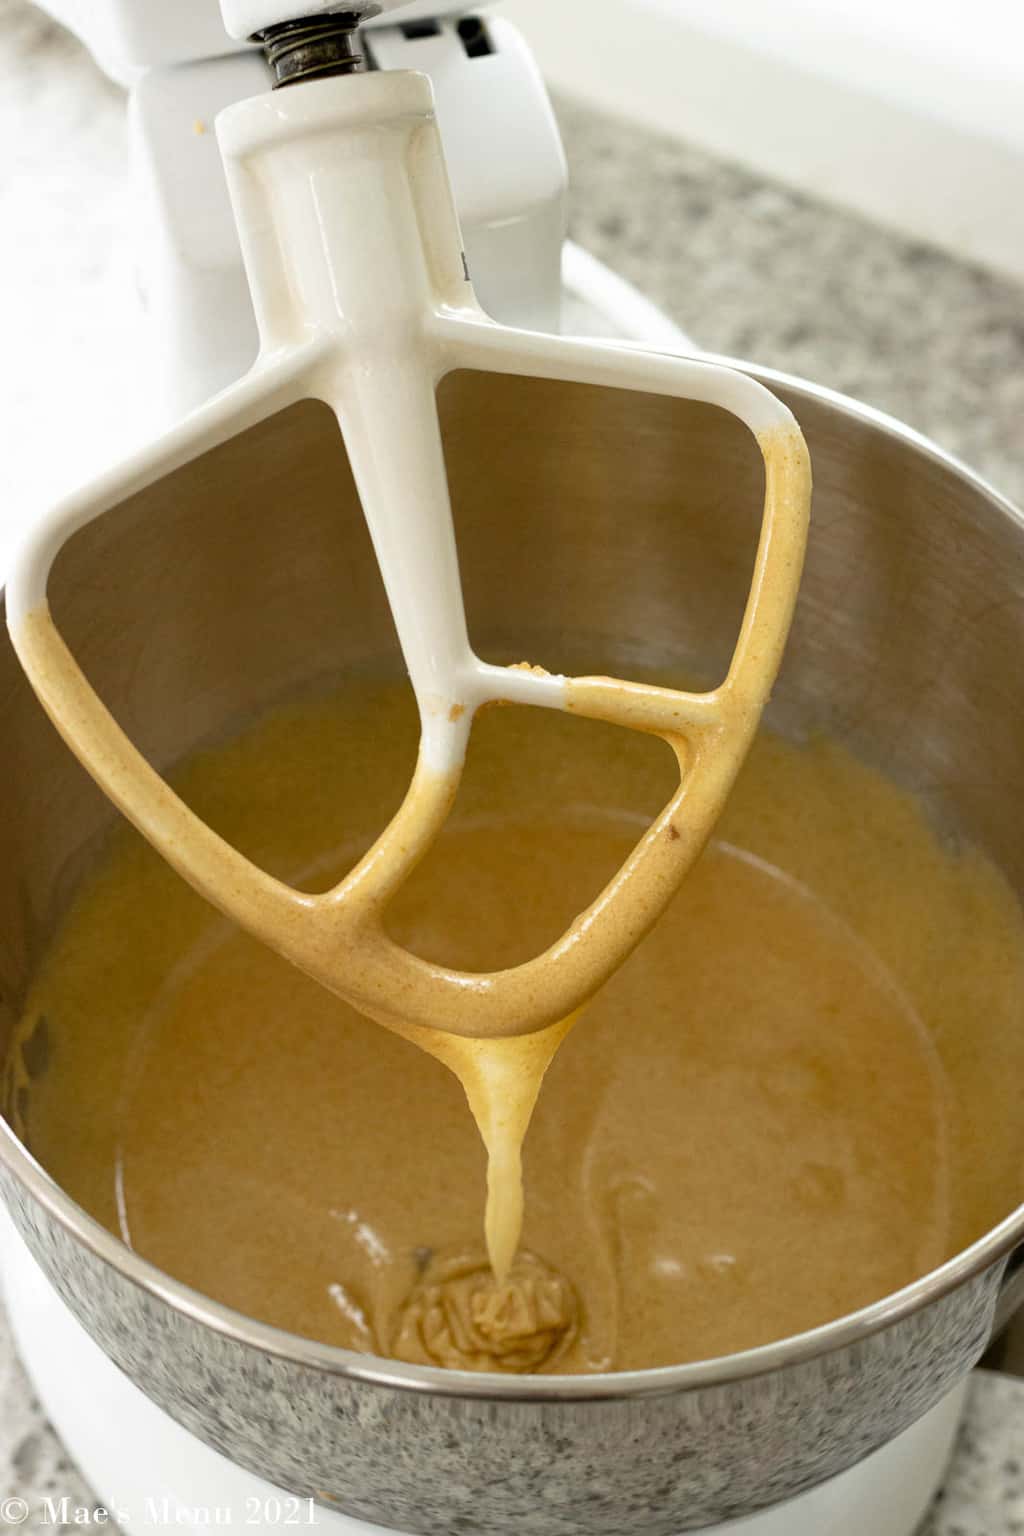 A thick golden batter dripping off the mixing paddle of the stand mixer